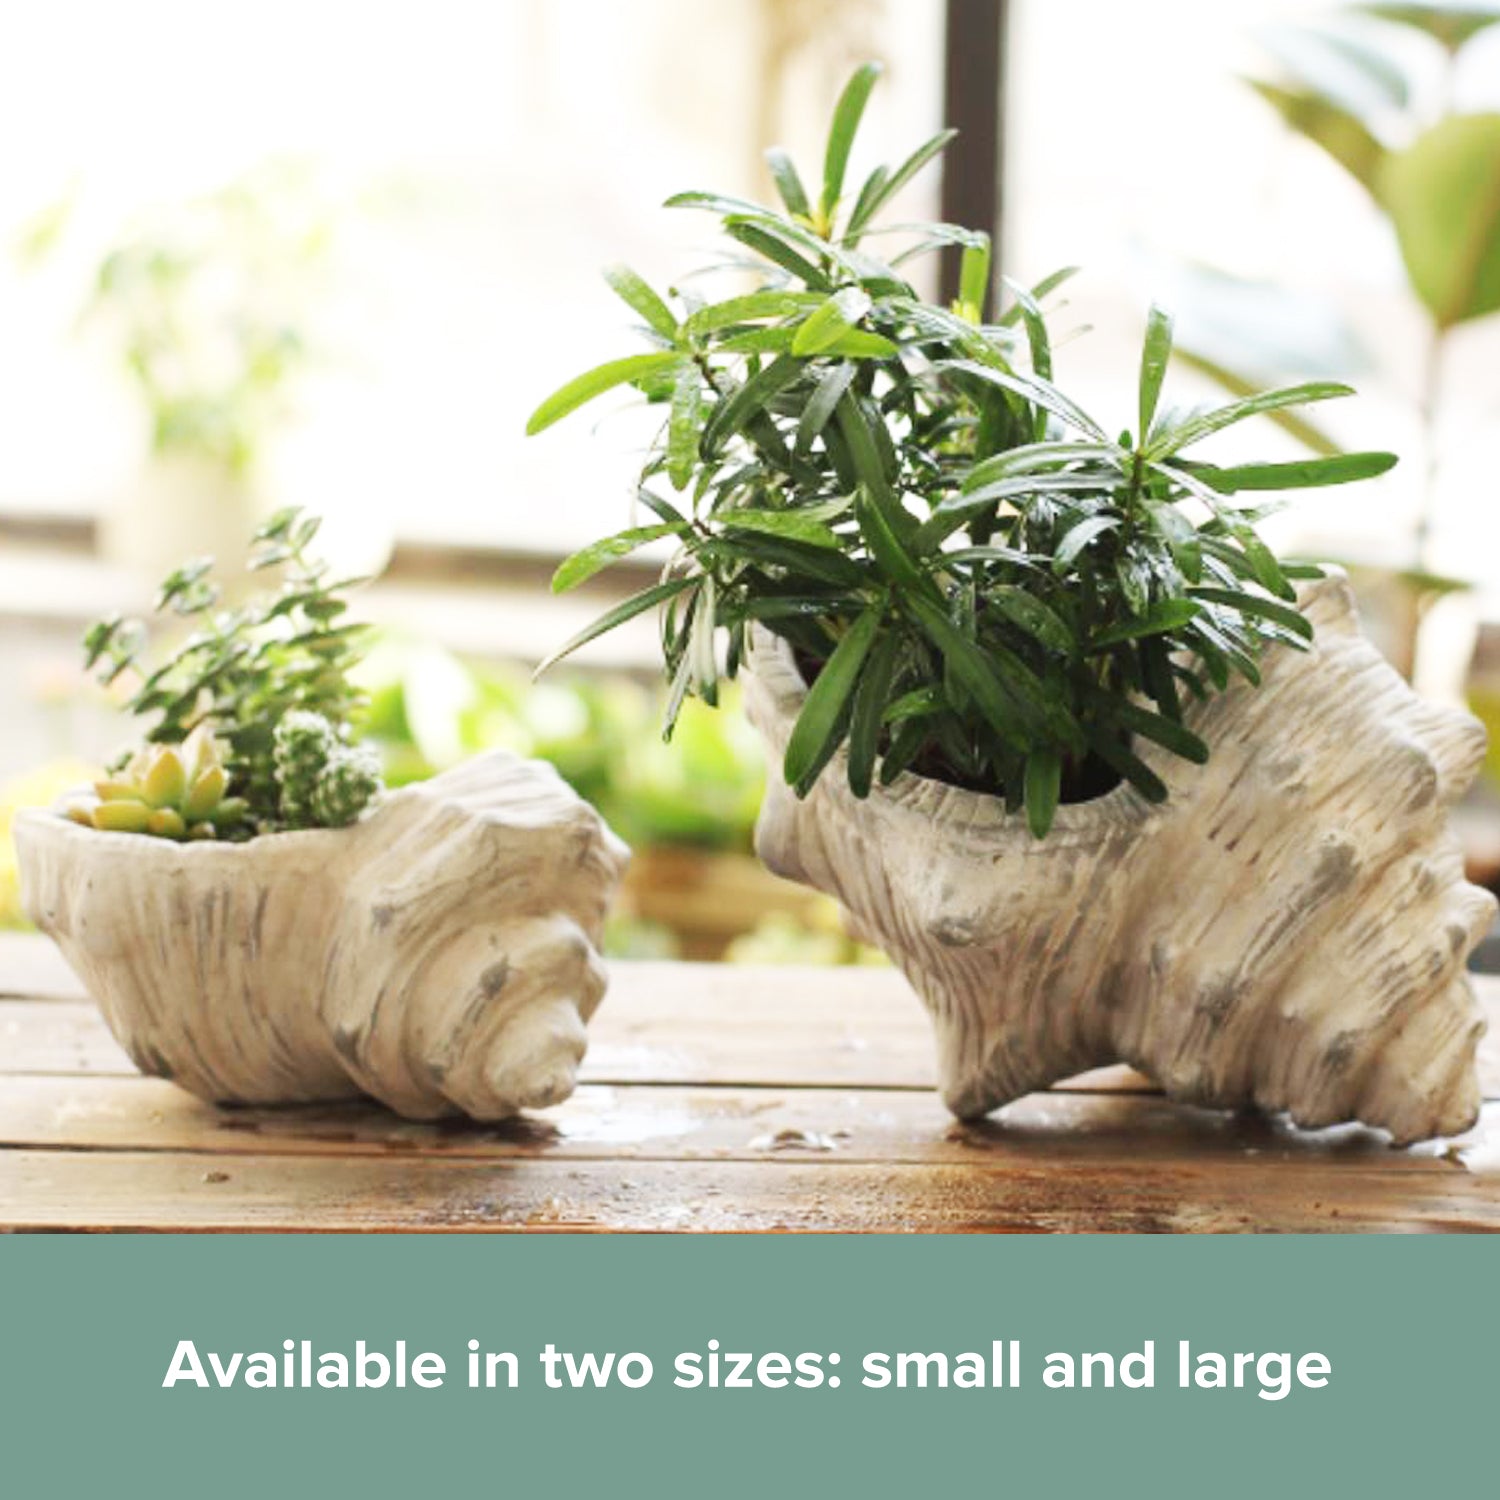 Load image into Gallery viewer, Ceramic Conch Shell Flower Pot | Seashell Planter Plants Décor